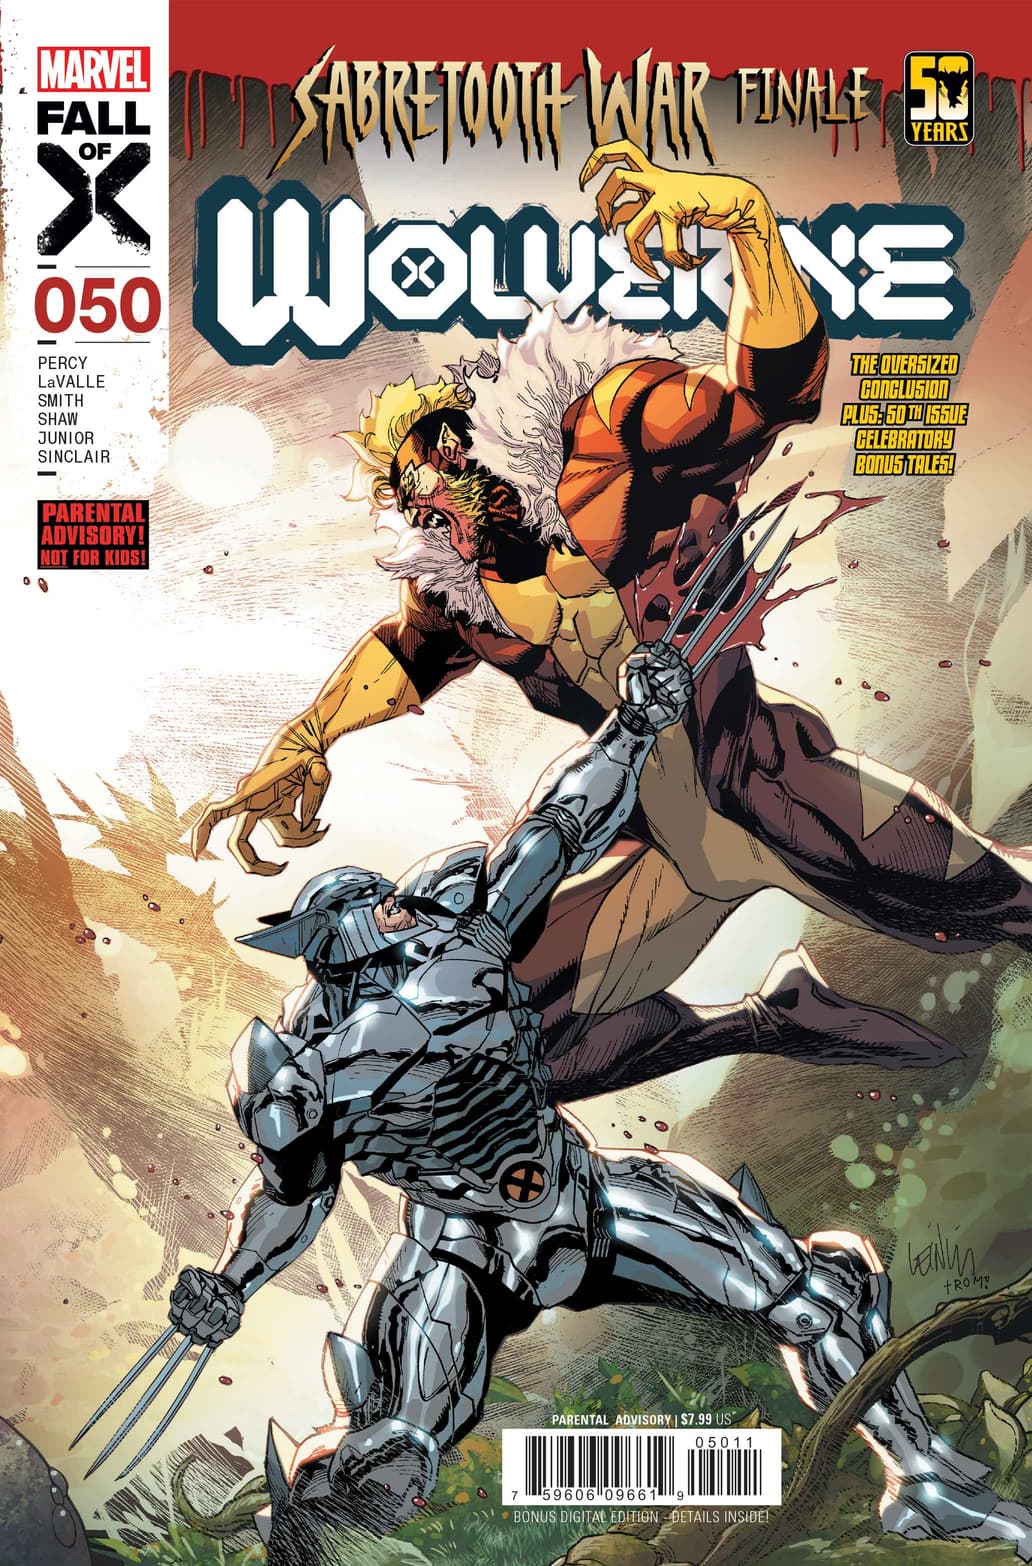 WOLVERINE #50 cover by Leinil Francis Yu